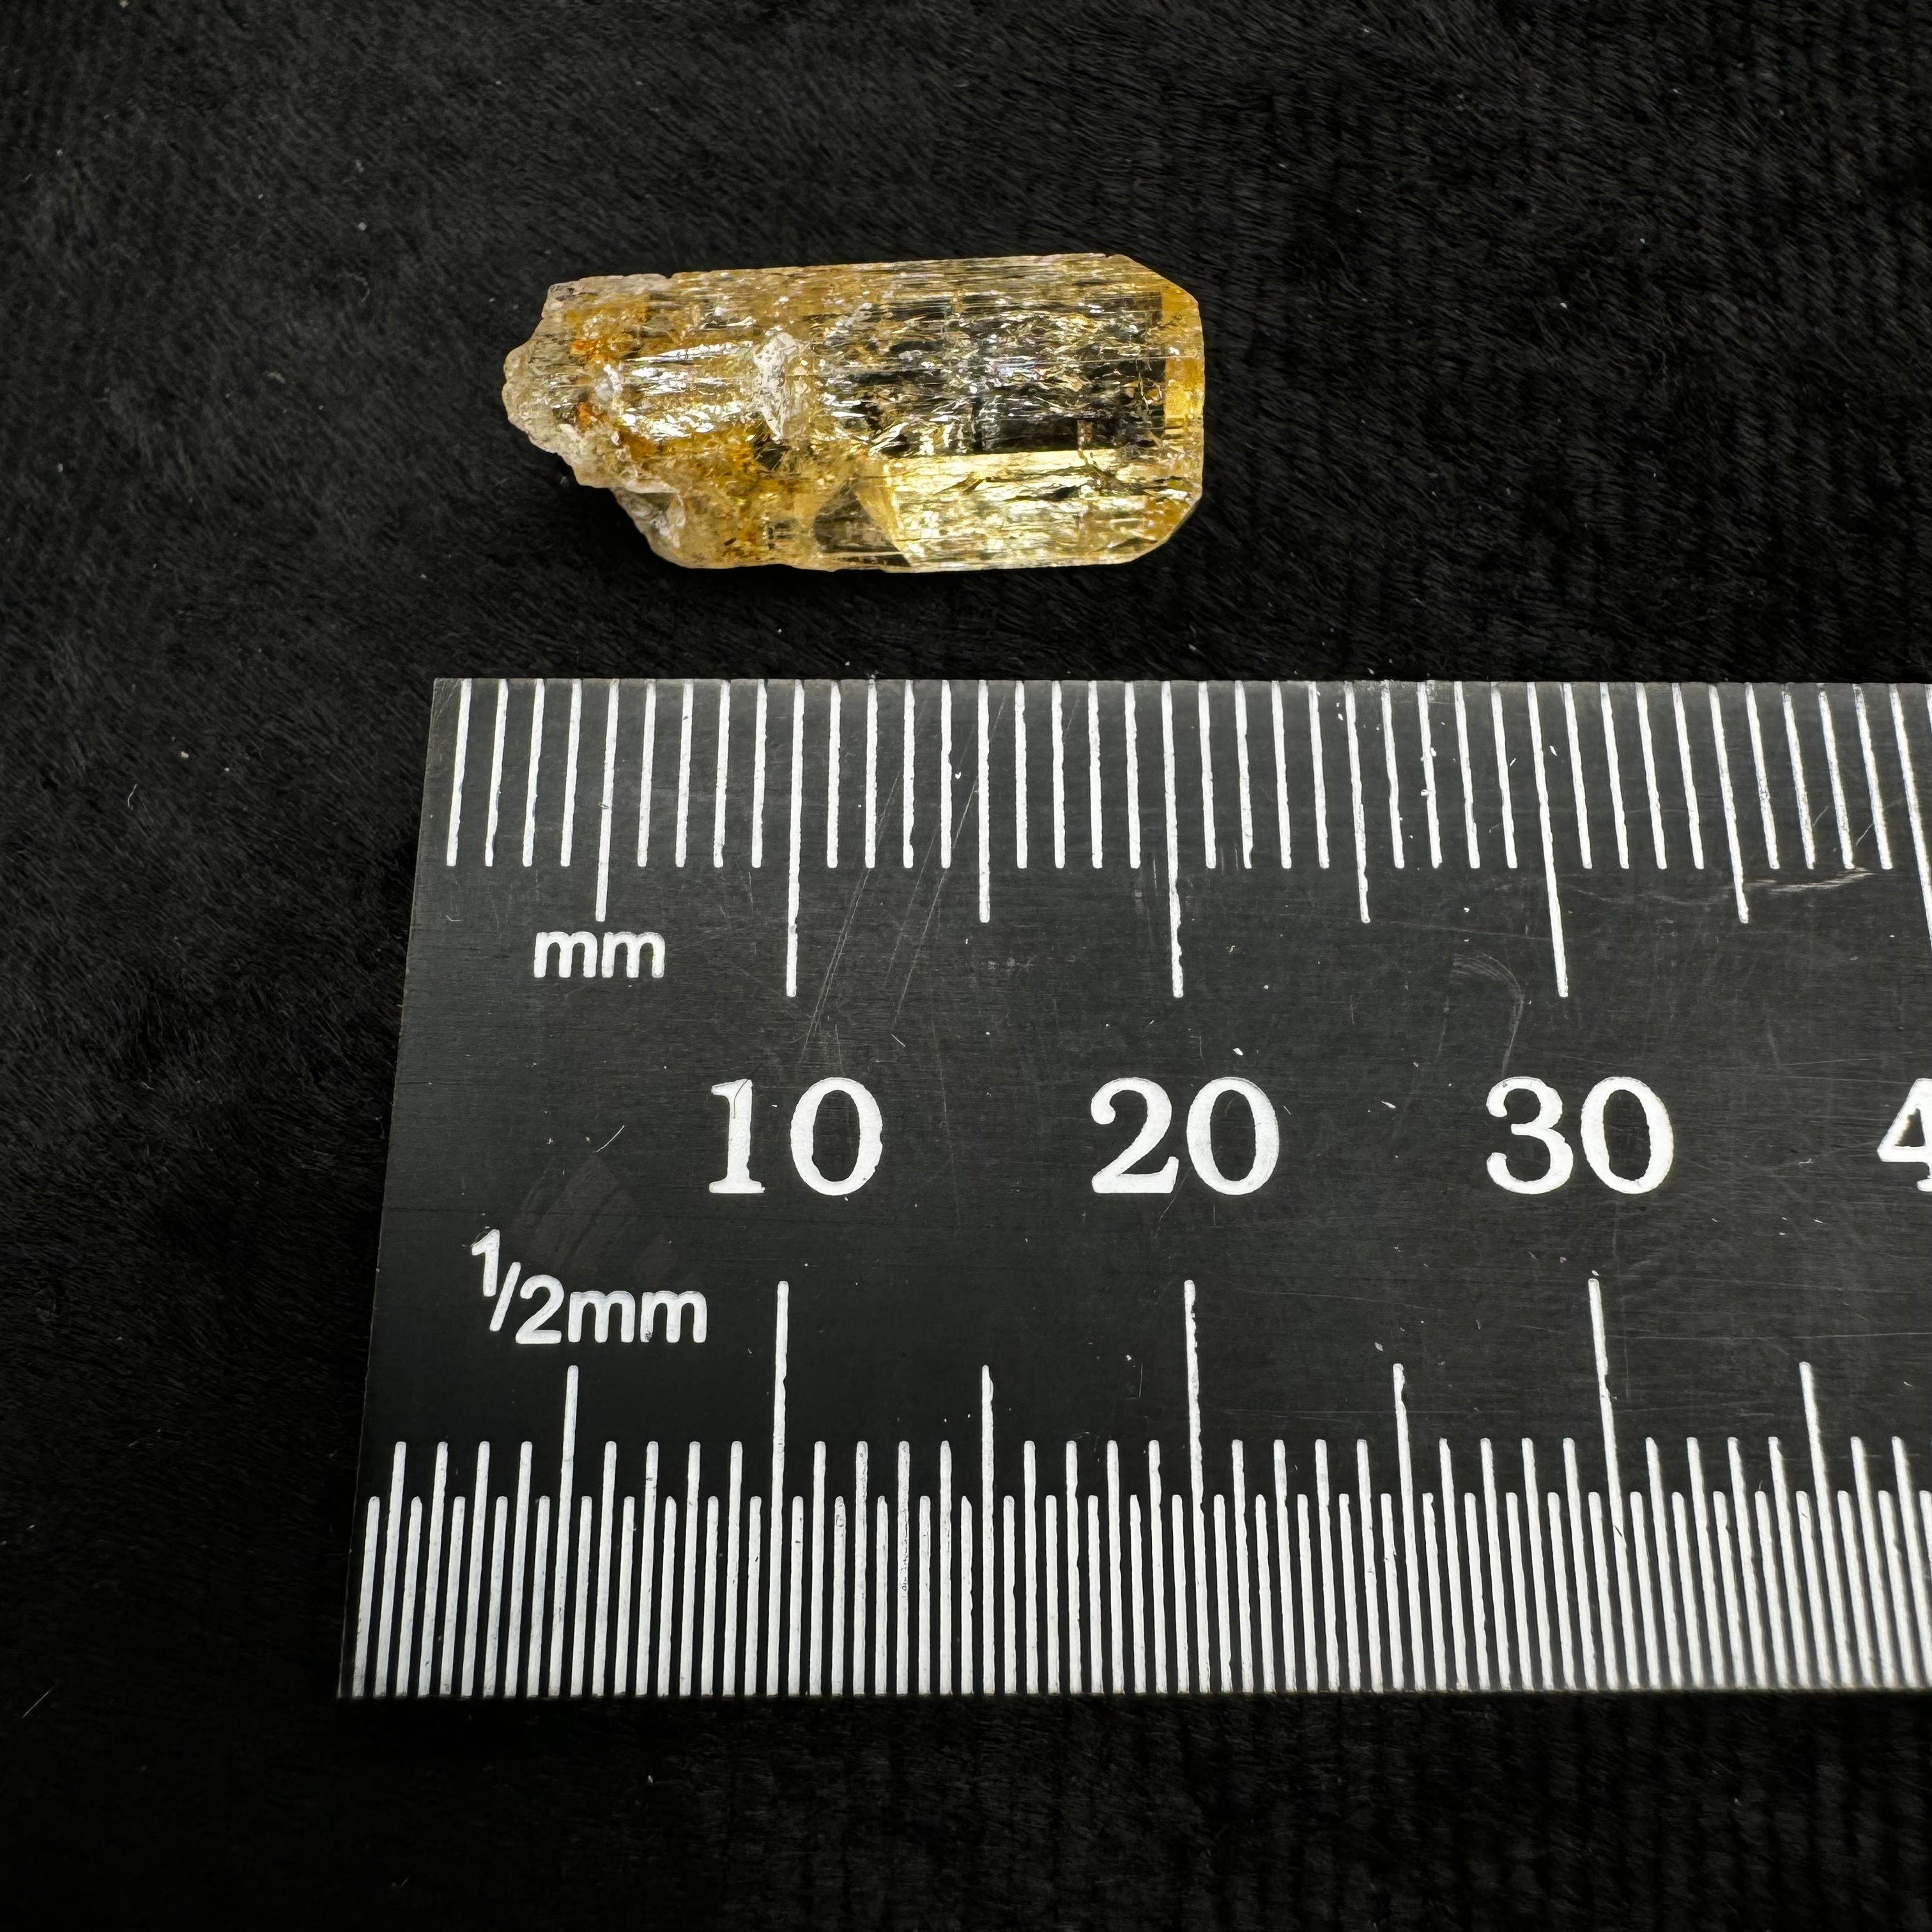 Imperial Topaz Natural Full Terminated Crystal - 197